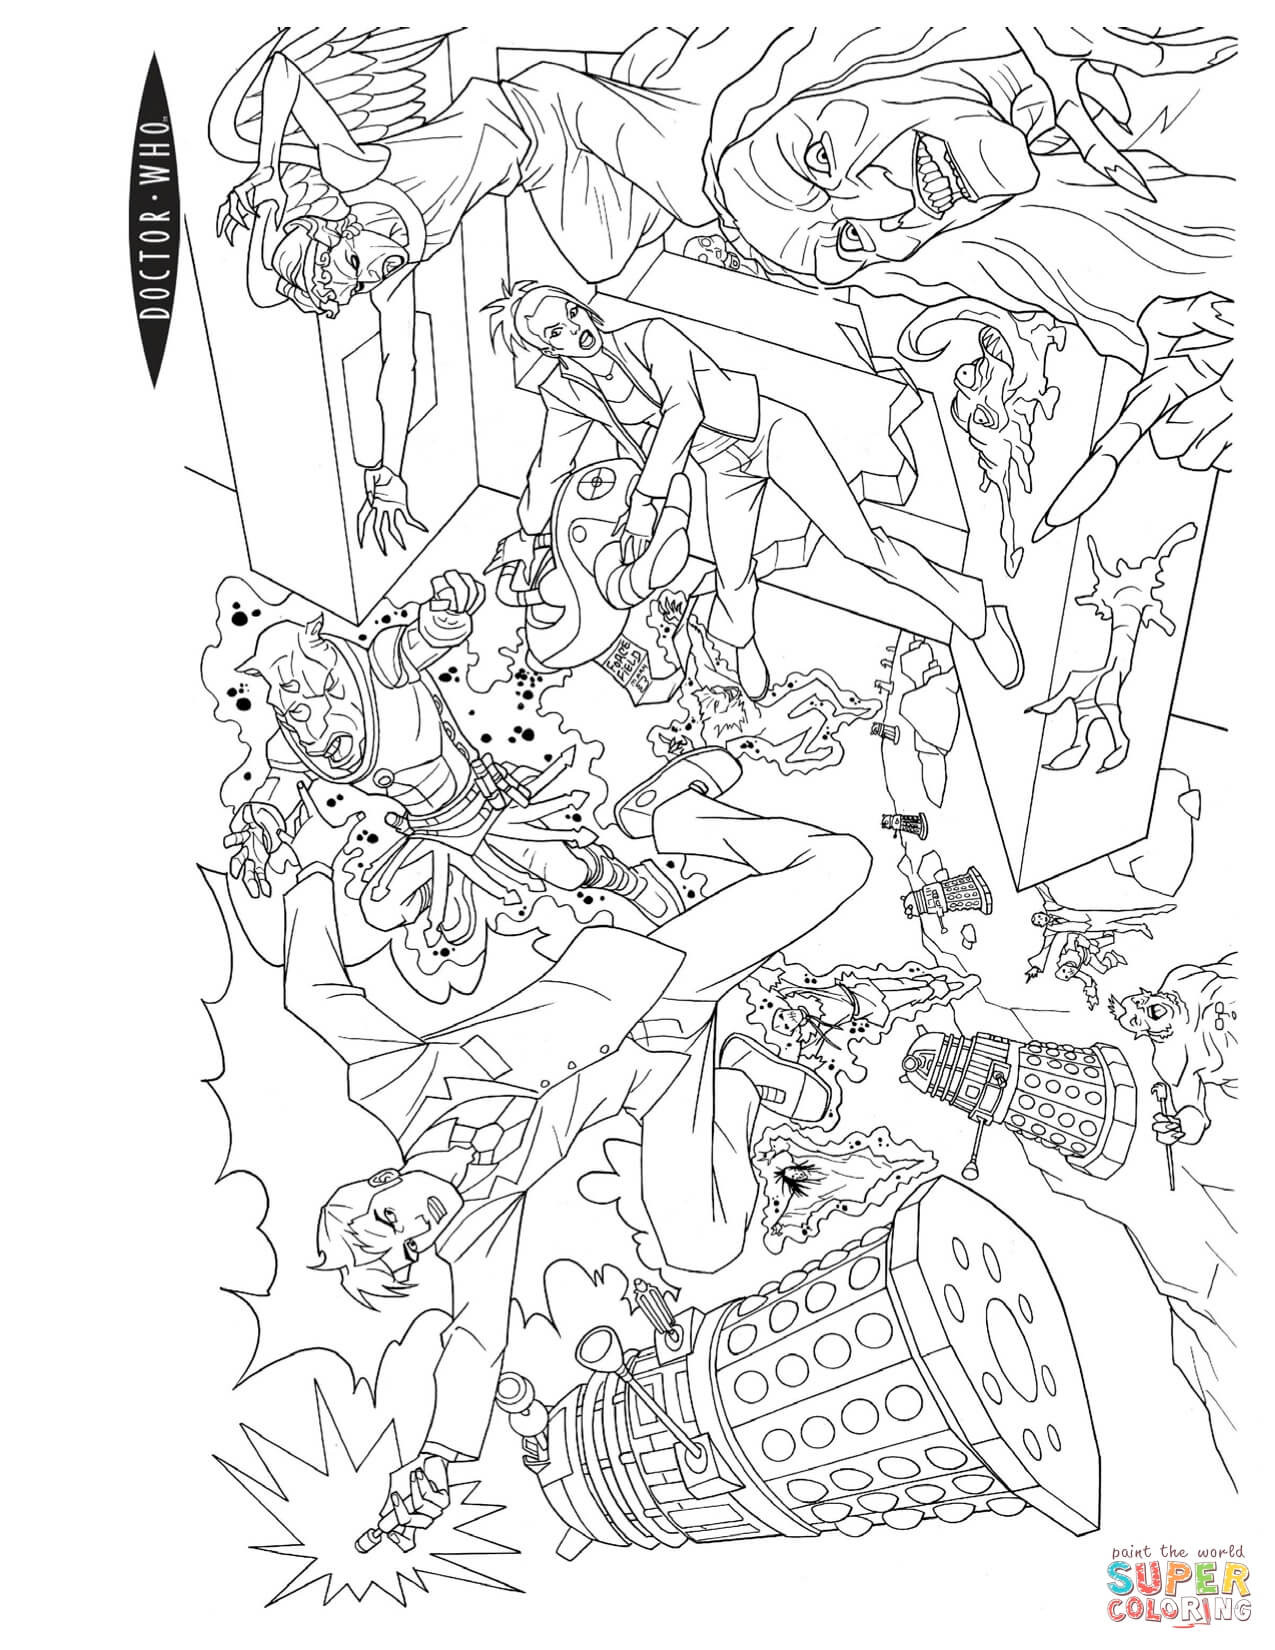 Doctor Who Coloring Pages
 Doctor Who Action Scene coloring page